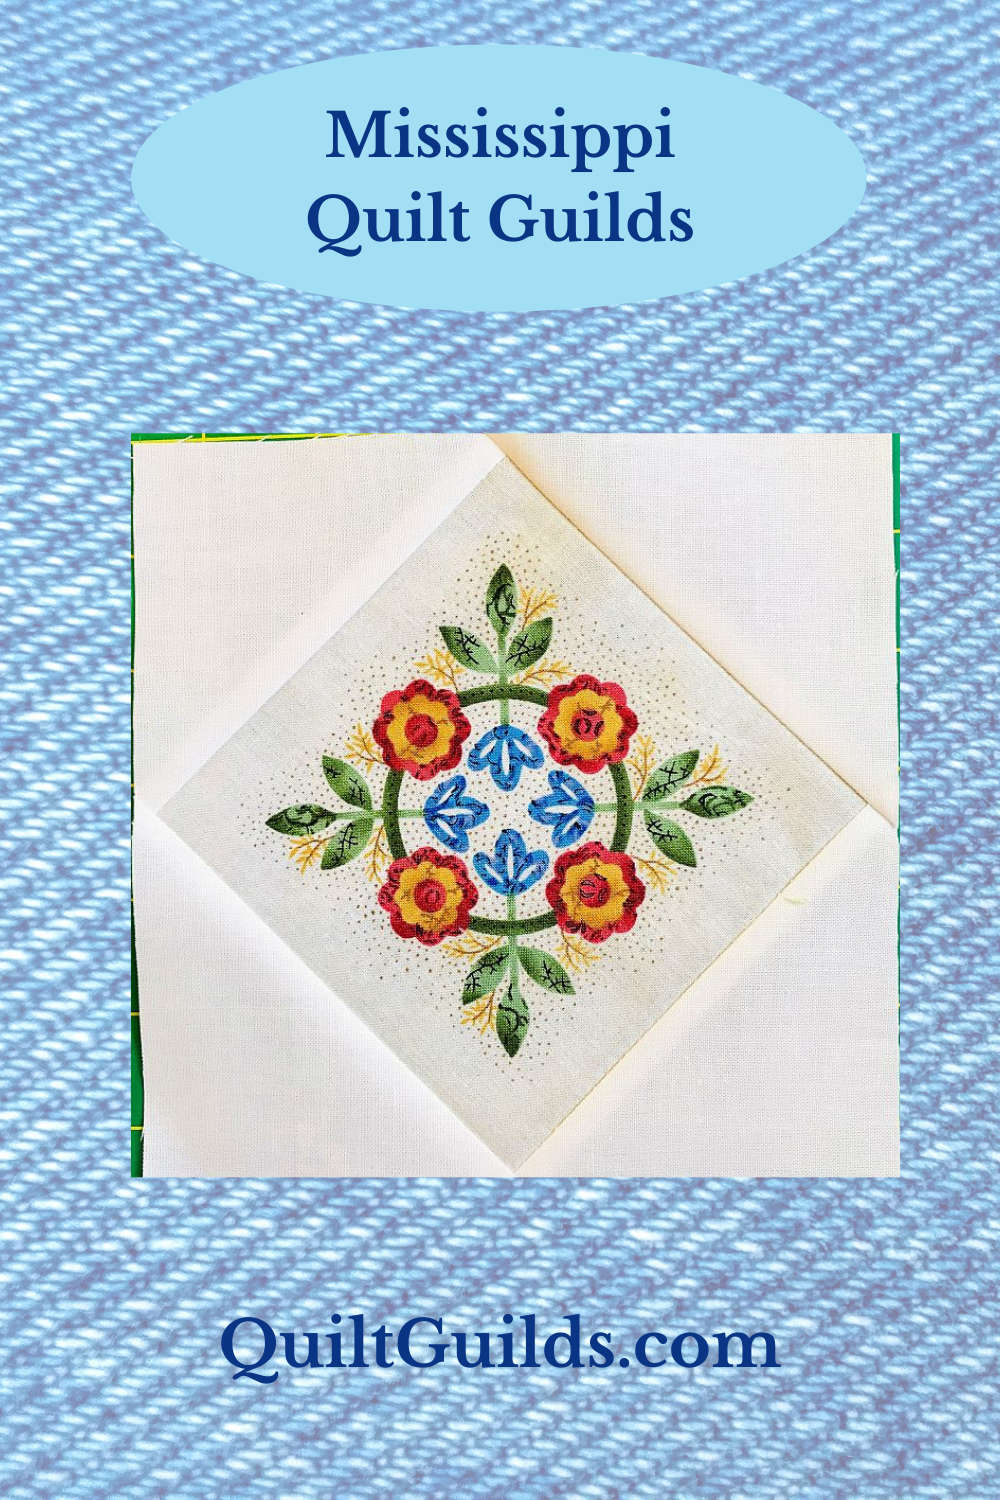 MS quilt guild pin